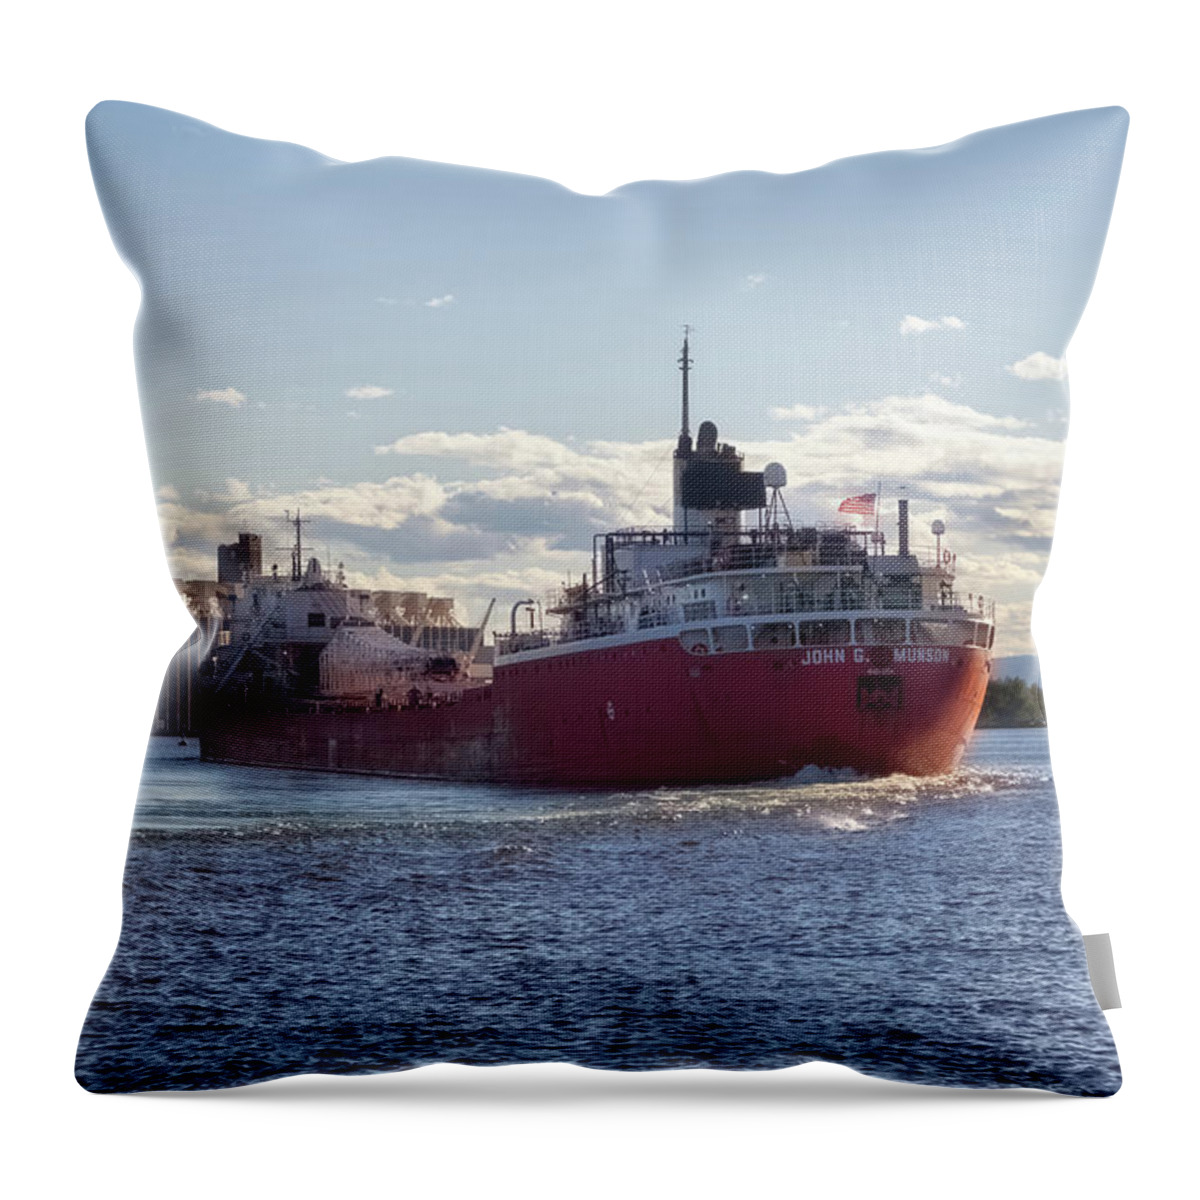 John G Munson Throw Pillow featuring the photograph John G Munson in the Duluth Harbor by Susan Rissi Tregoning